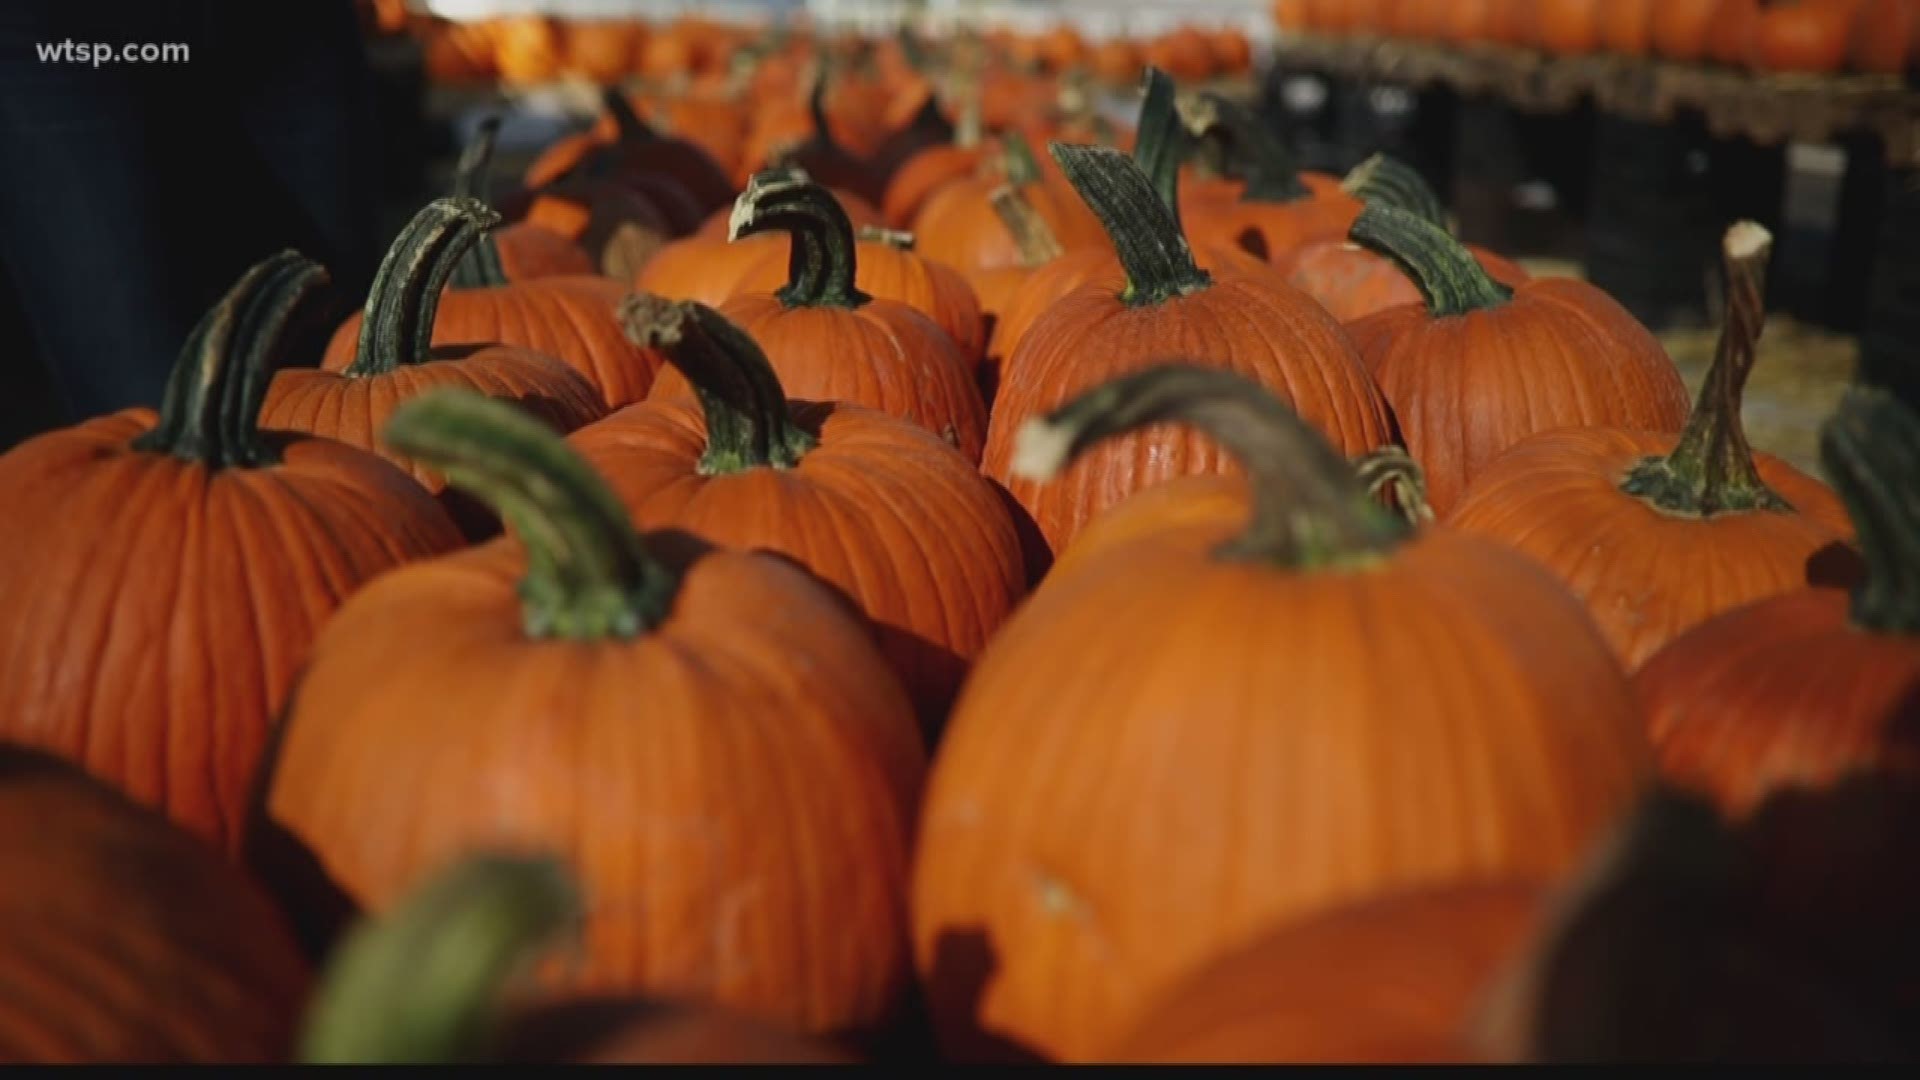 A look at the variety of pumpkins at Gallagher's Pumpkins & Christmas Trees.